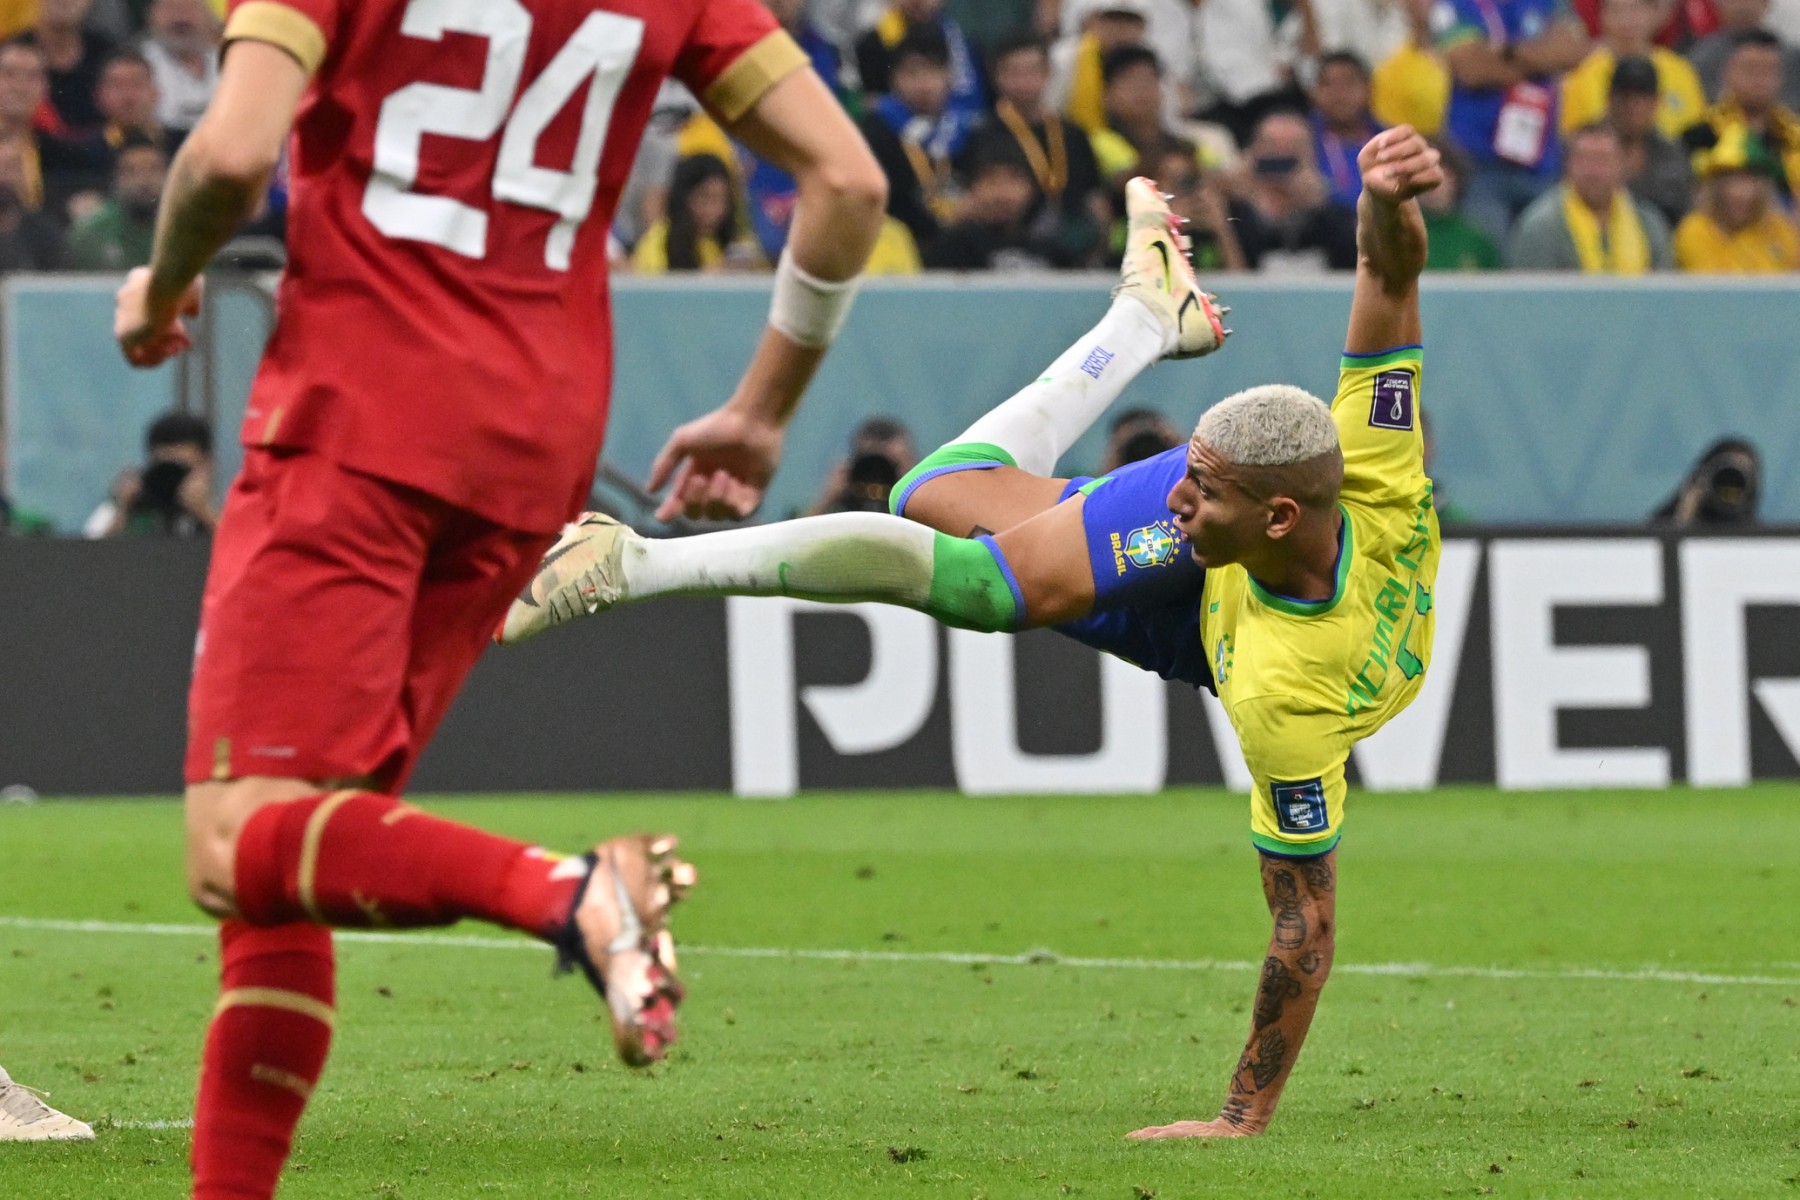 Richarlison double gives Brazil World Cup win over Serbia | The Guardian Nigeria News - Nigeria and World News  Sport  The Guardian Nigeria News  Nigeria and World News